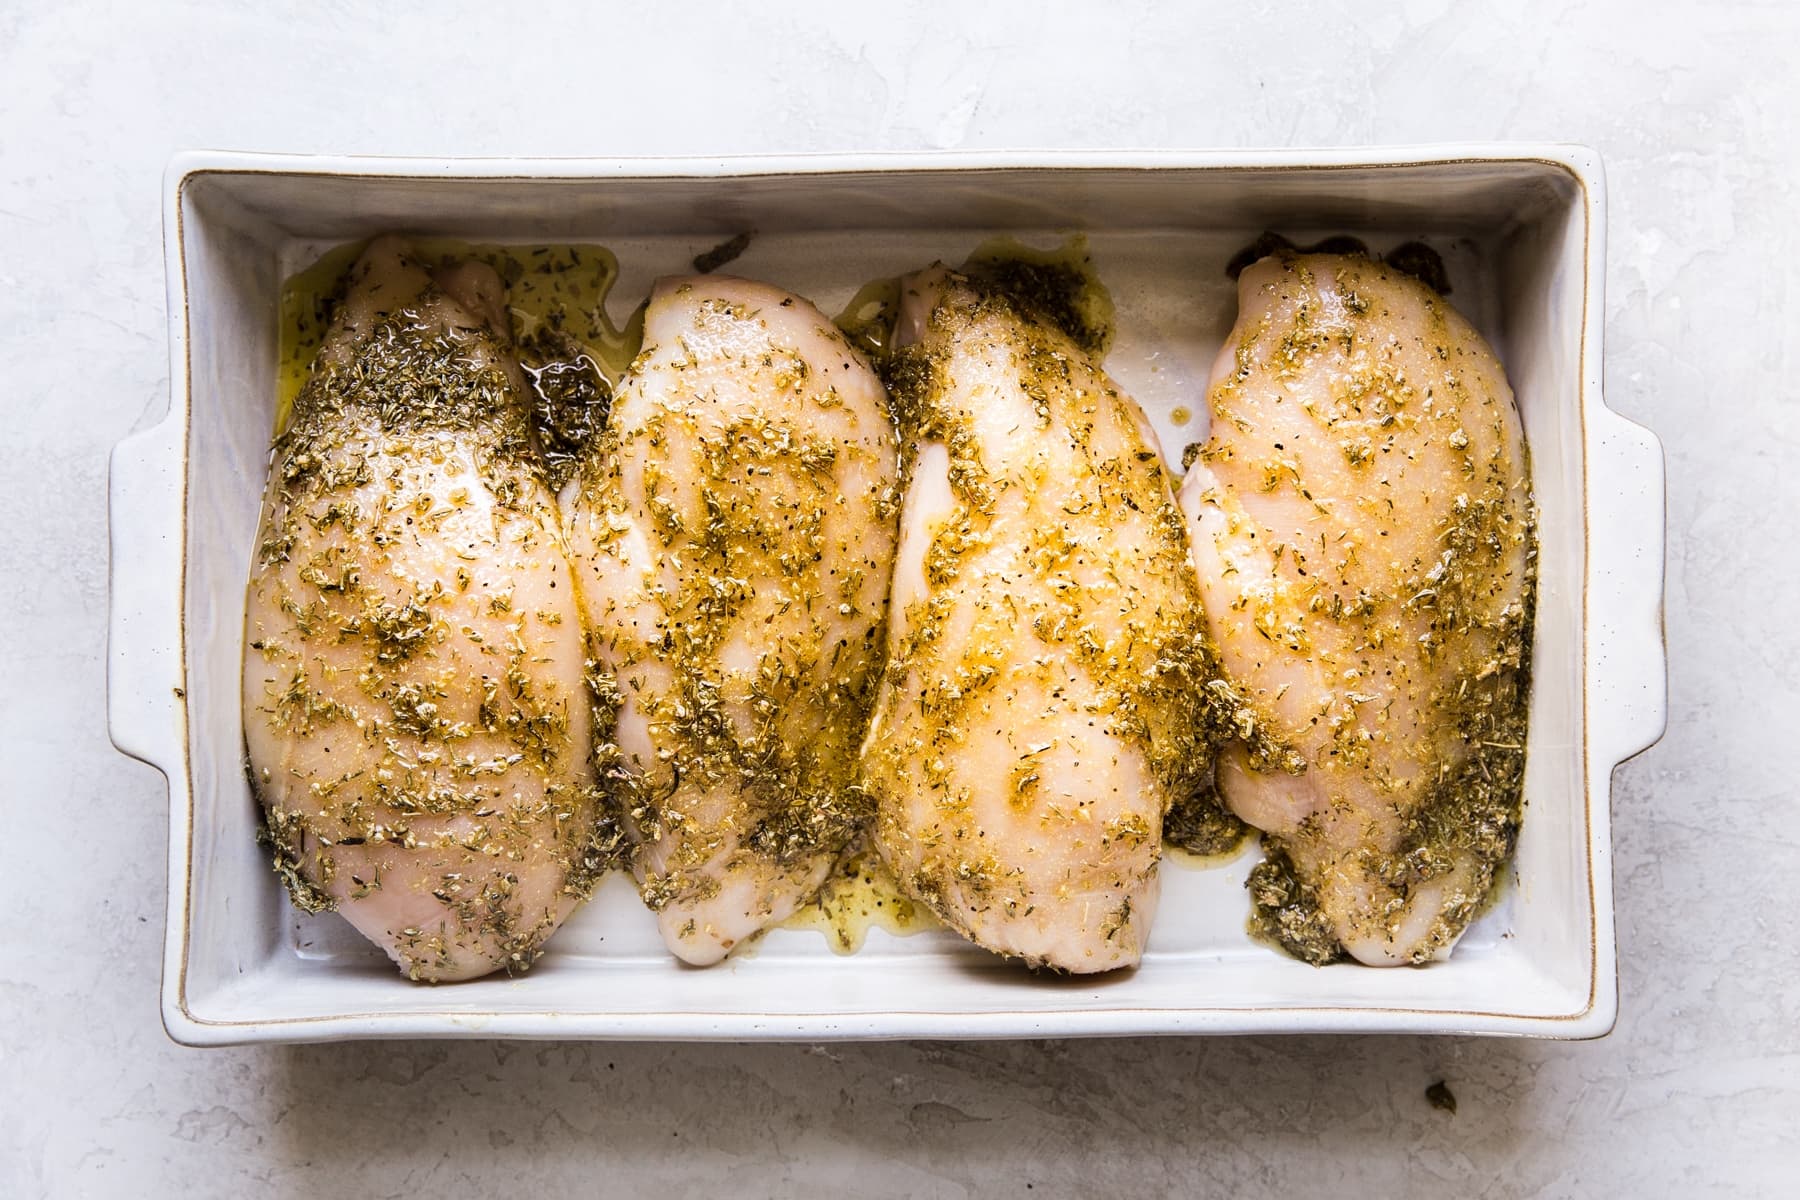 4 chicken breasts with olive oil and spices in a baking dish.